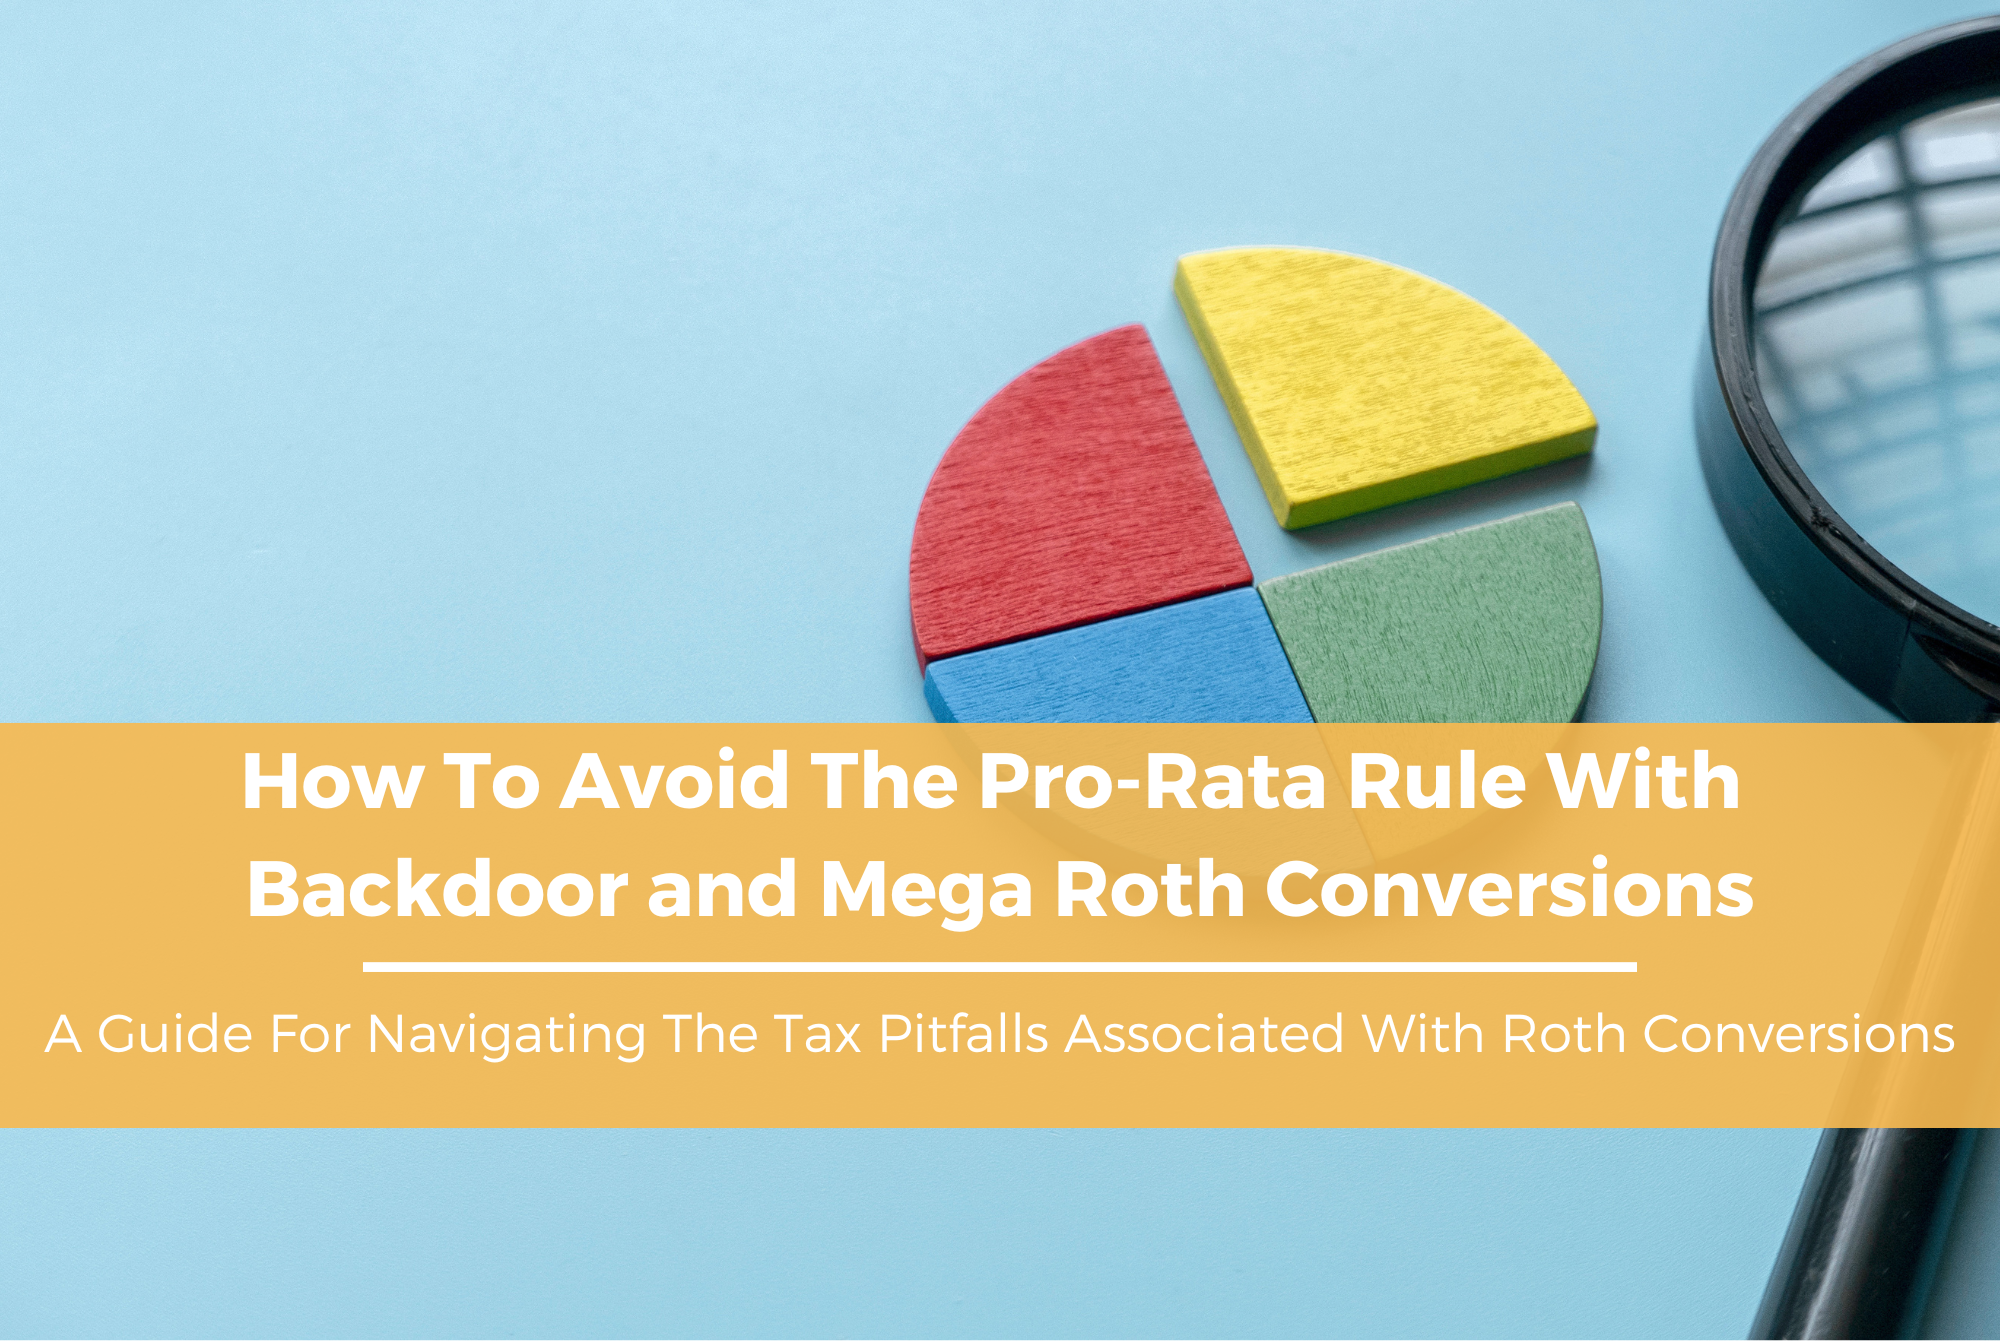 How To Avoid The Pro-Rata Rule